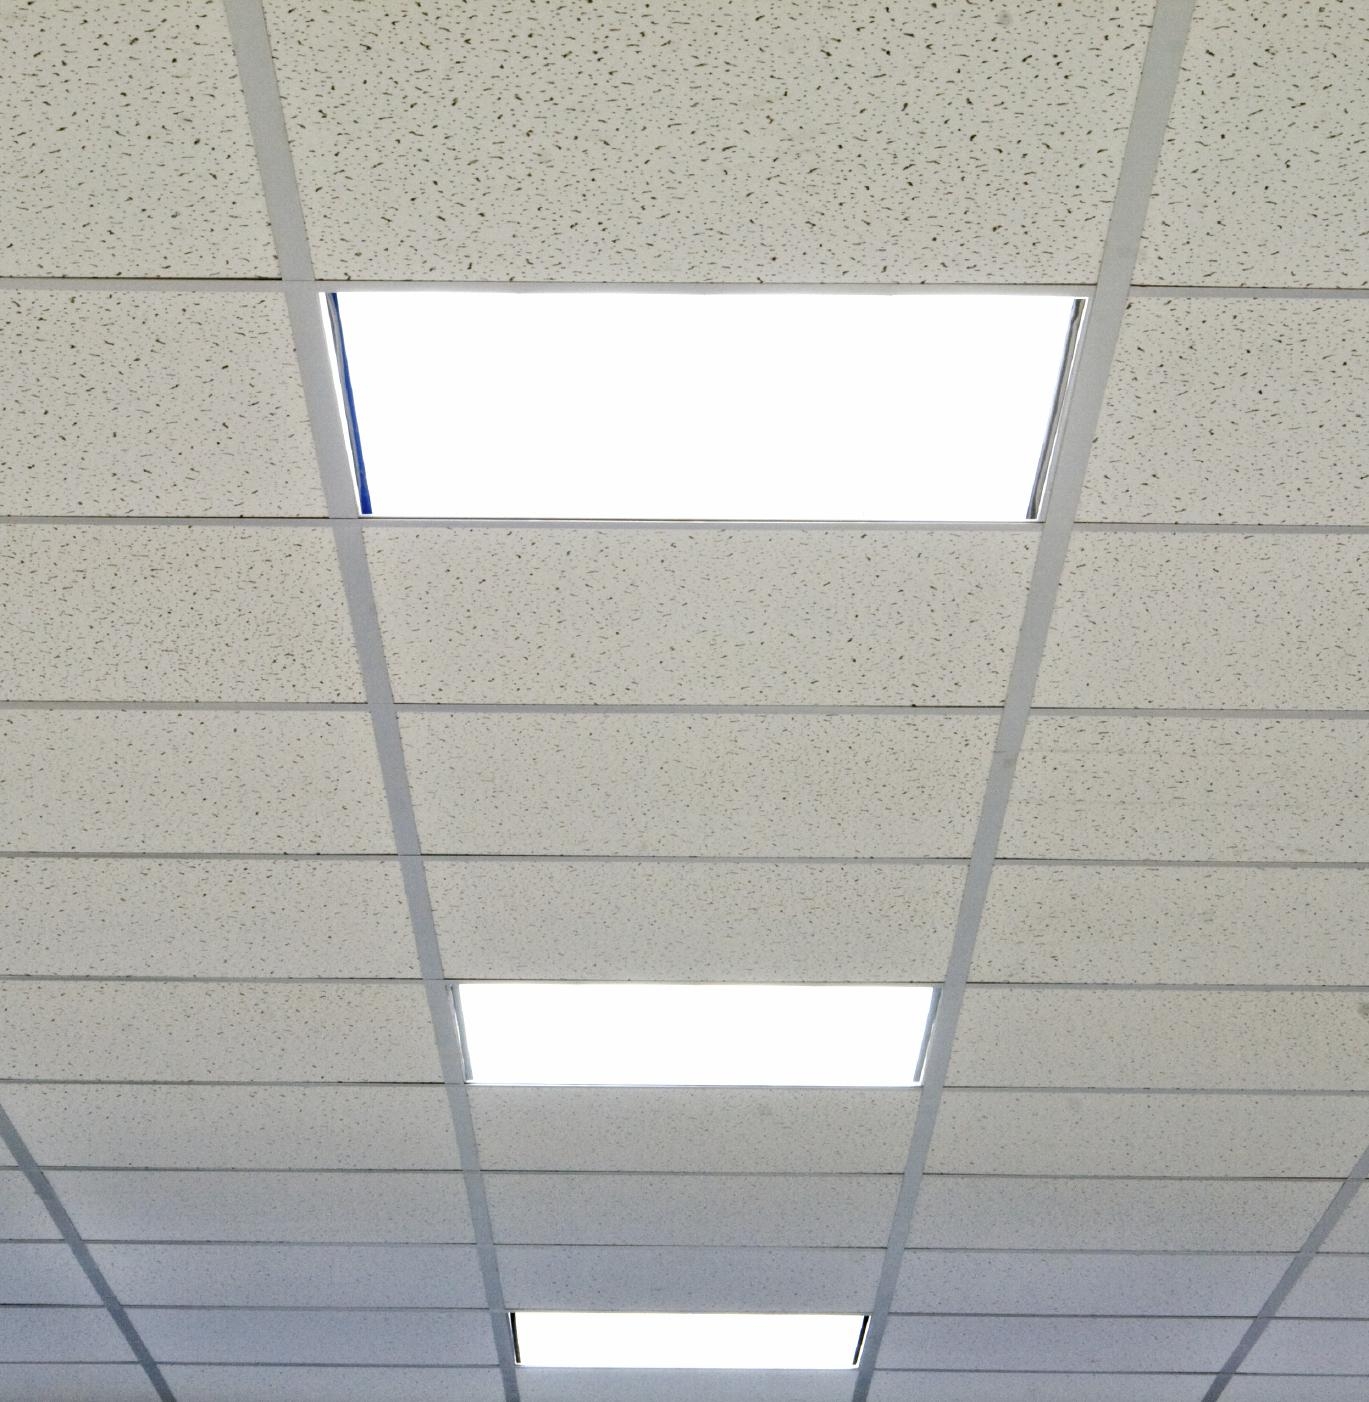 Permalink to Ceiling Tiles For Office Space